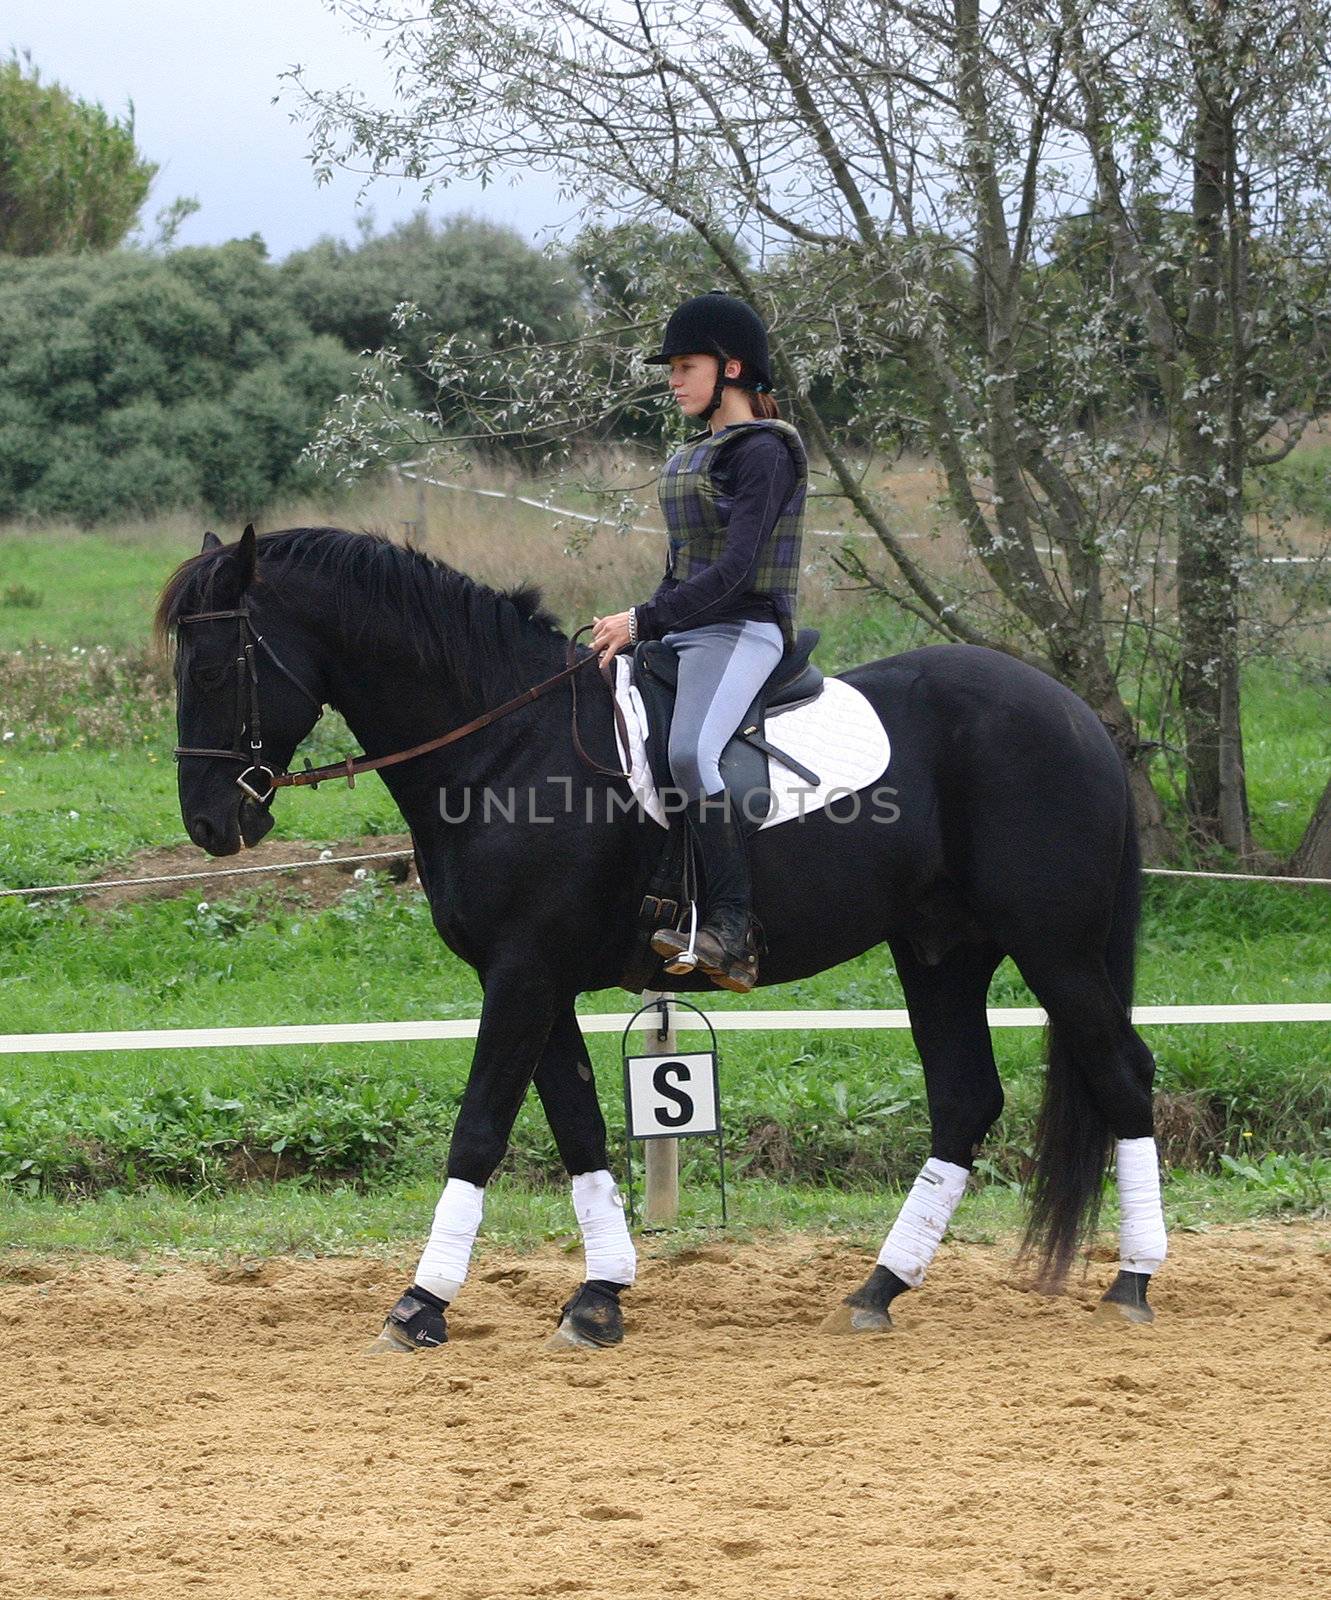 horse and woman in dressage by cynoclub